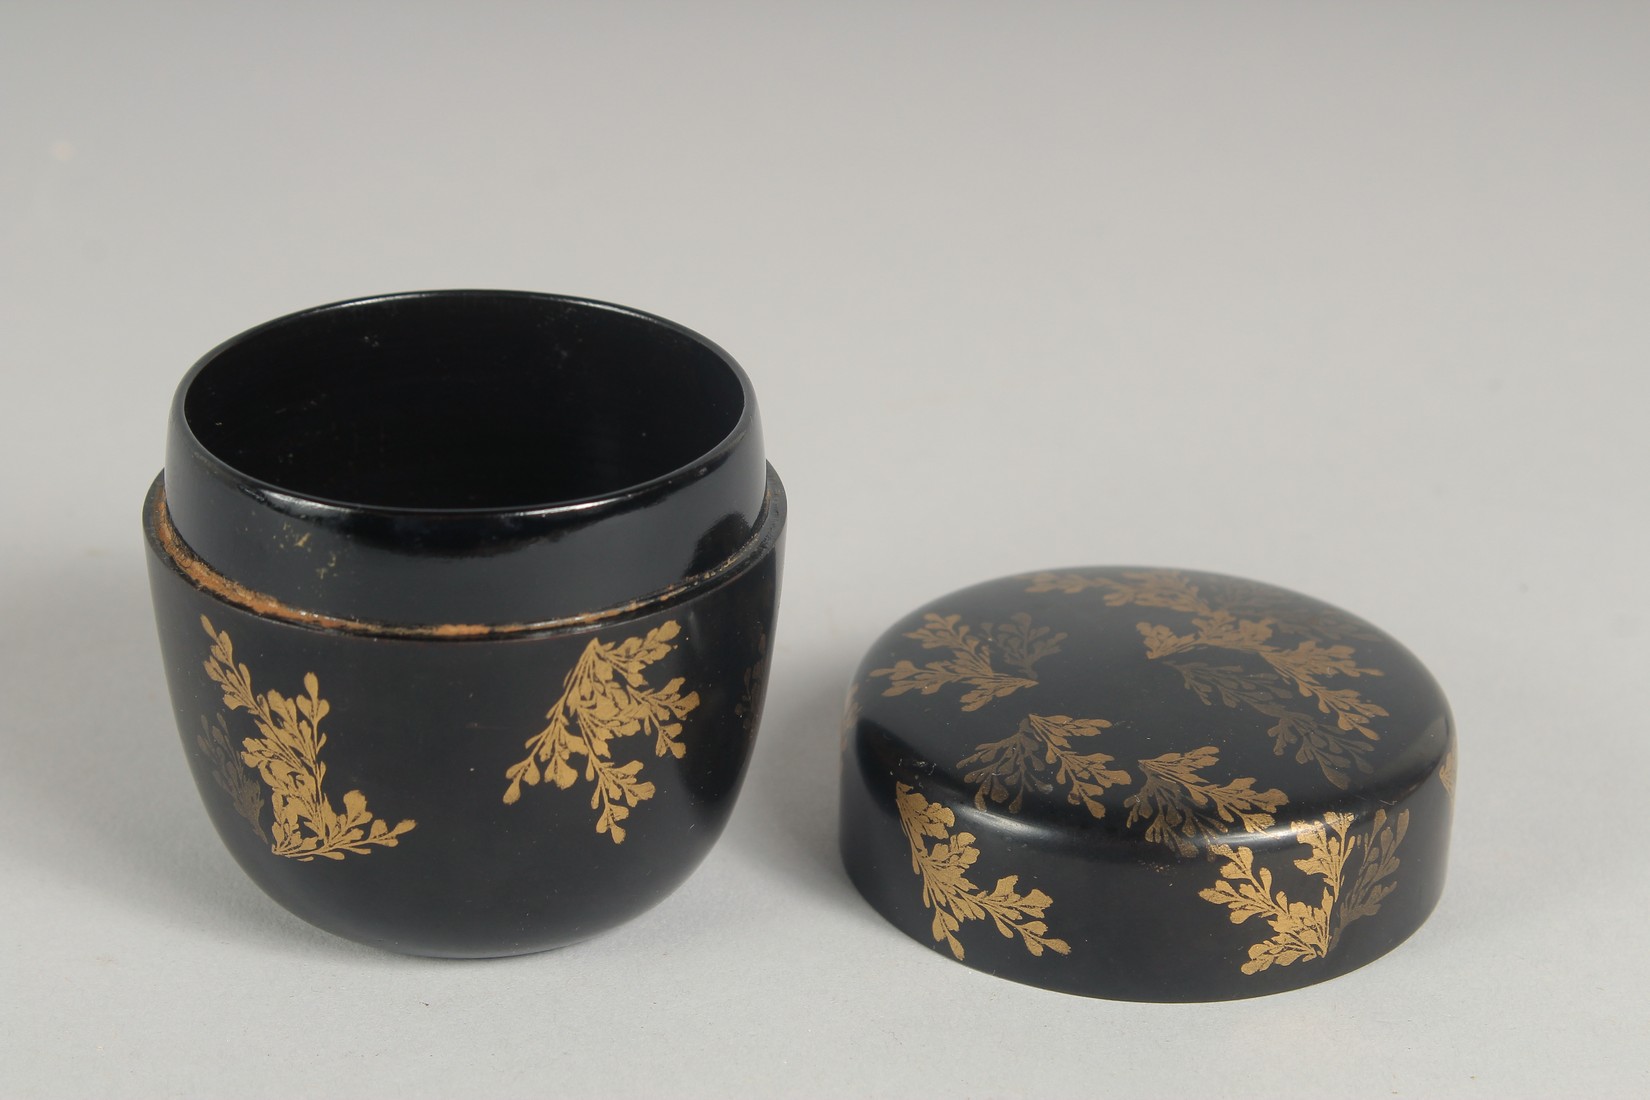 A JAPANESE LACQUER NATSUME / TEA CADDY, decorated with gold foliage, 6cm high. - Image 4 of 4